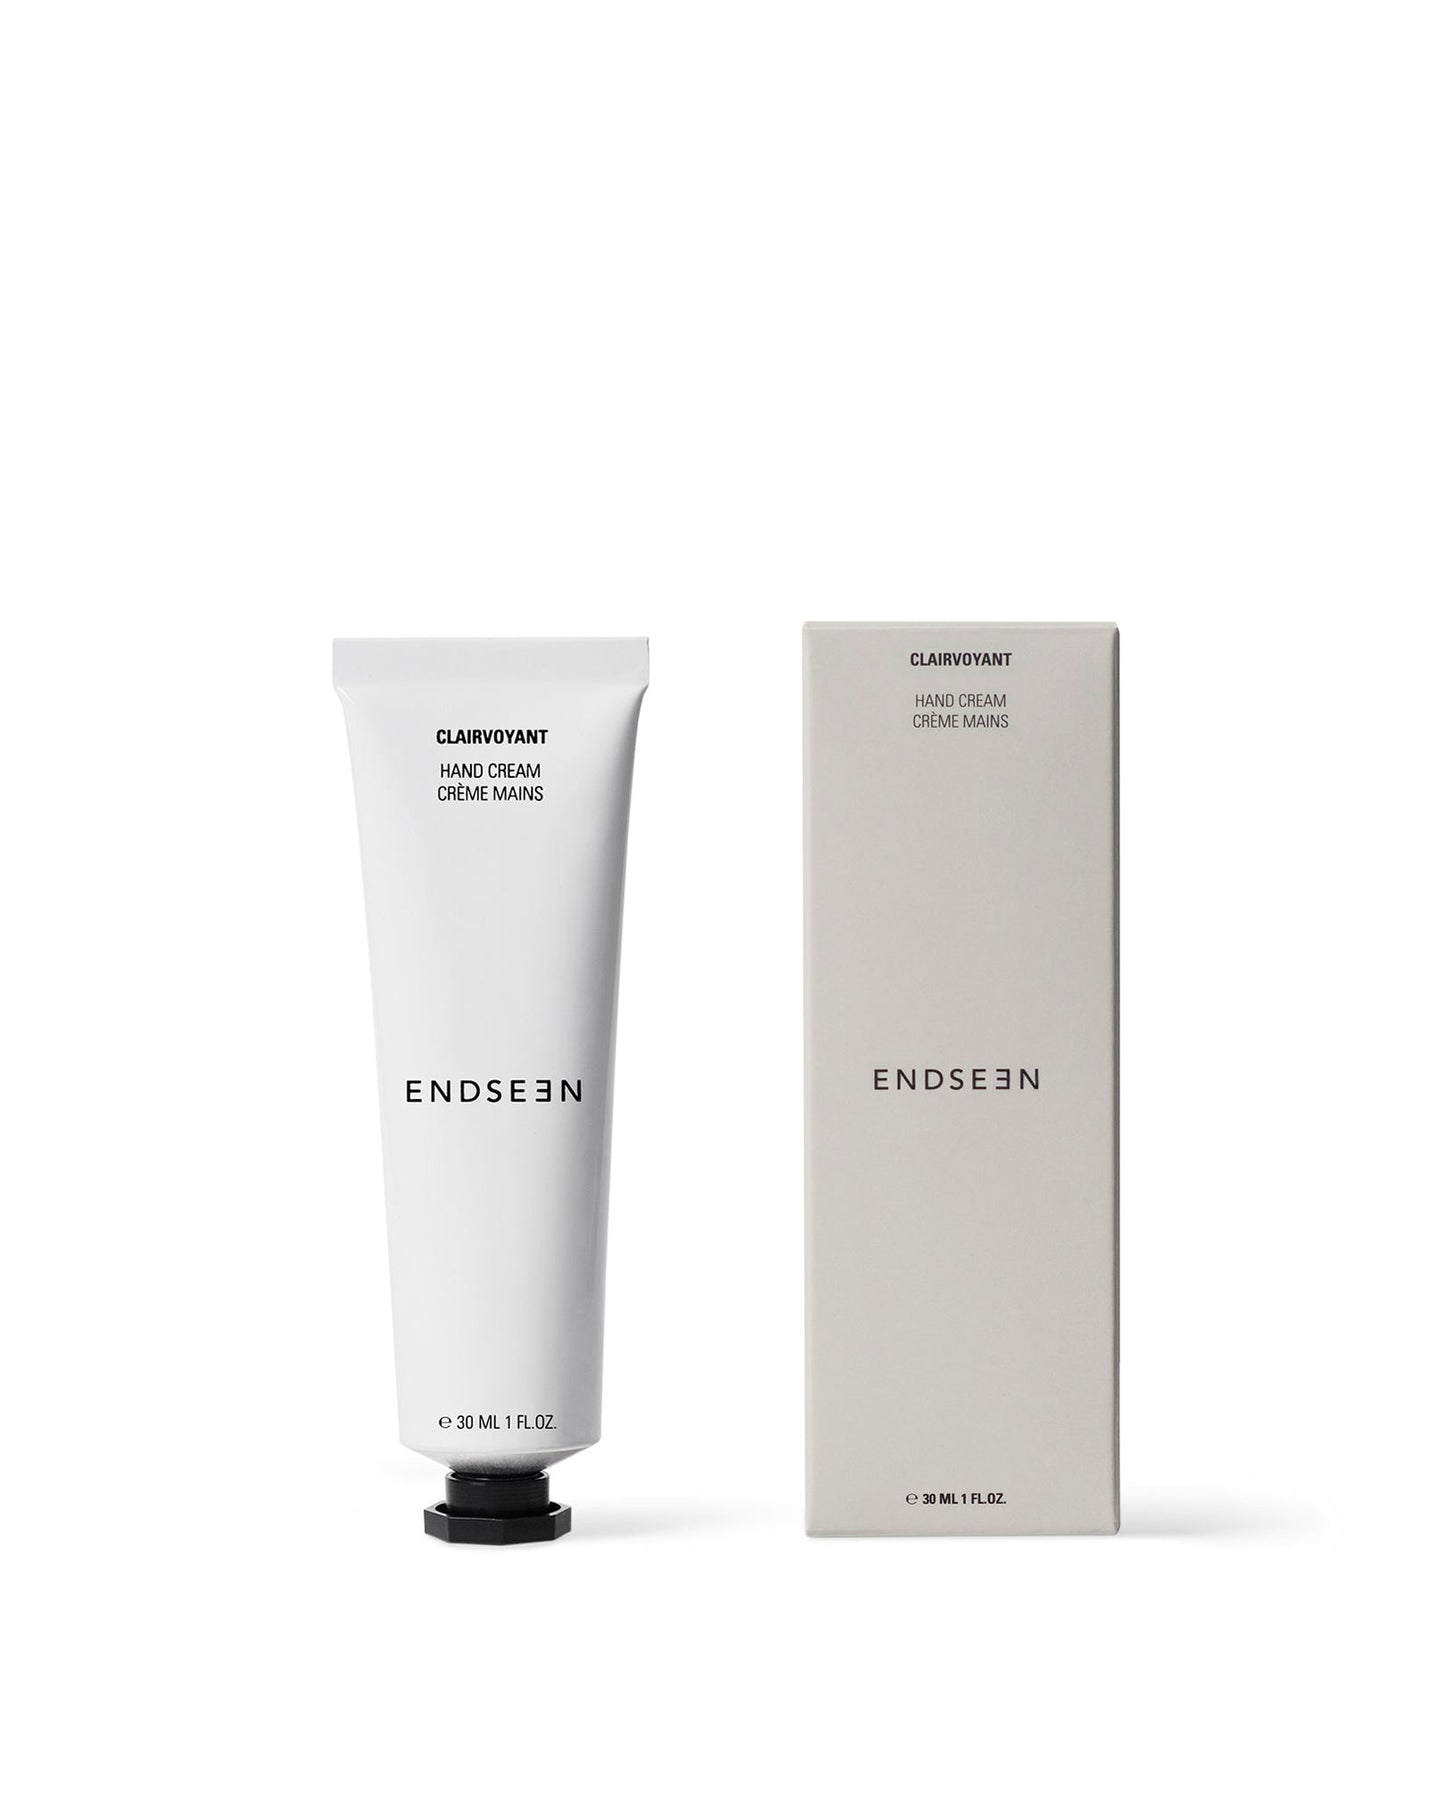 ENDSEEN Hand Cream in Clairvoyant available at Lahn.shop